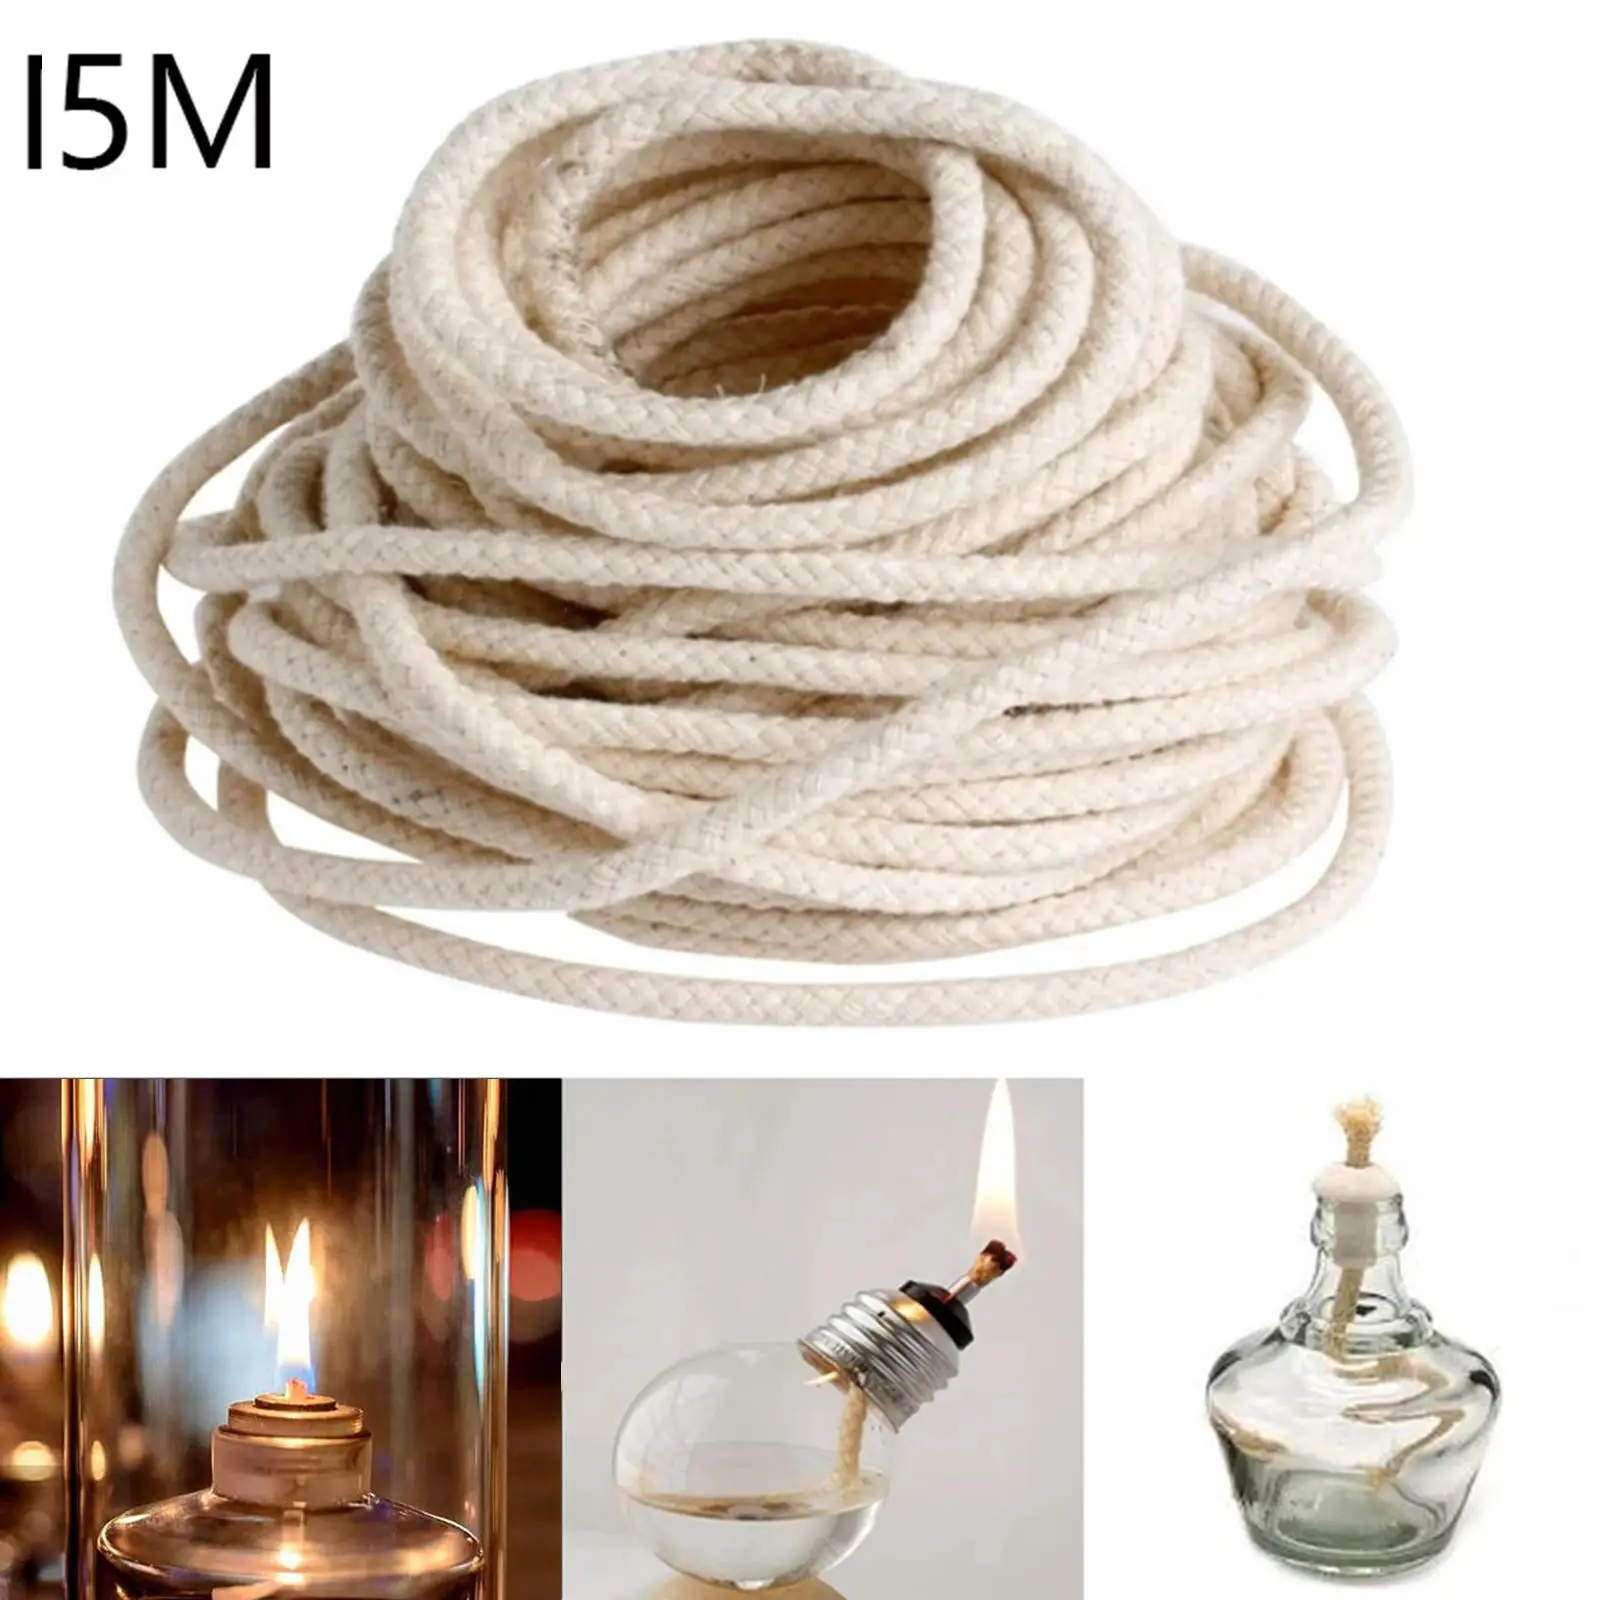 15M (49 ft) Braided Cotton Core Candle Making Wick For Oil Or Kerosene Lamps 6mm